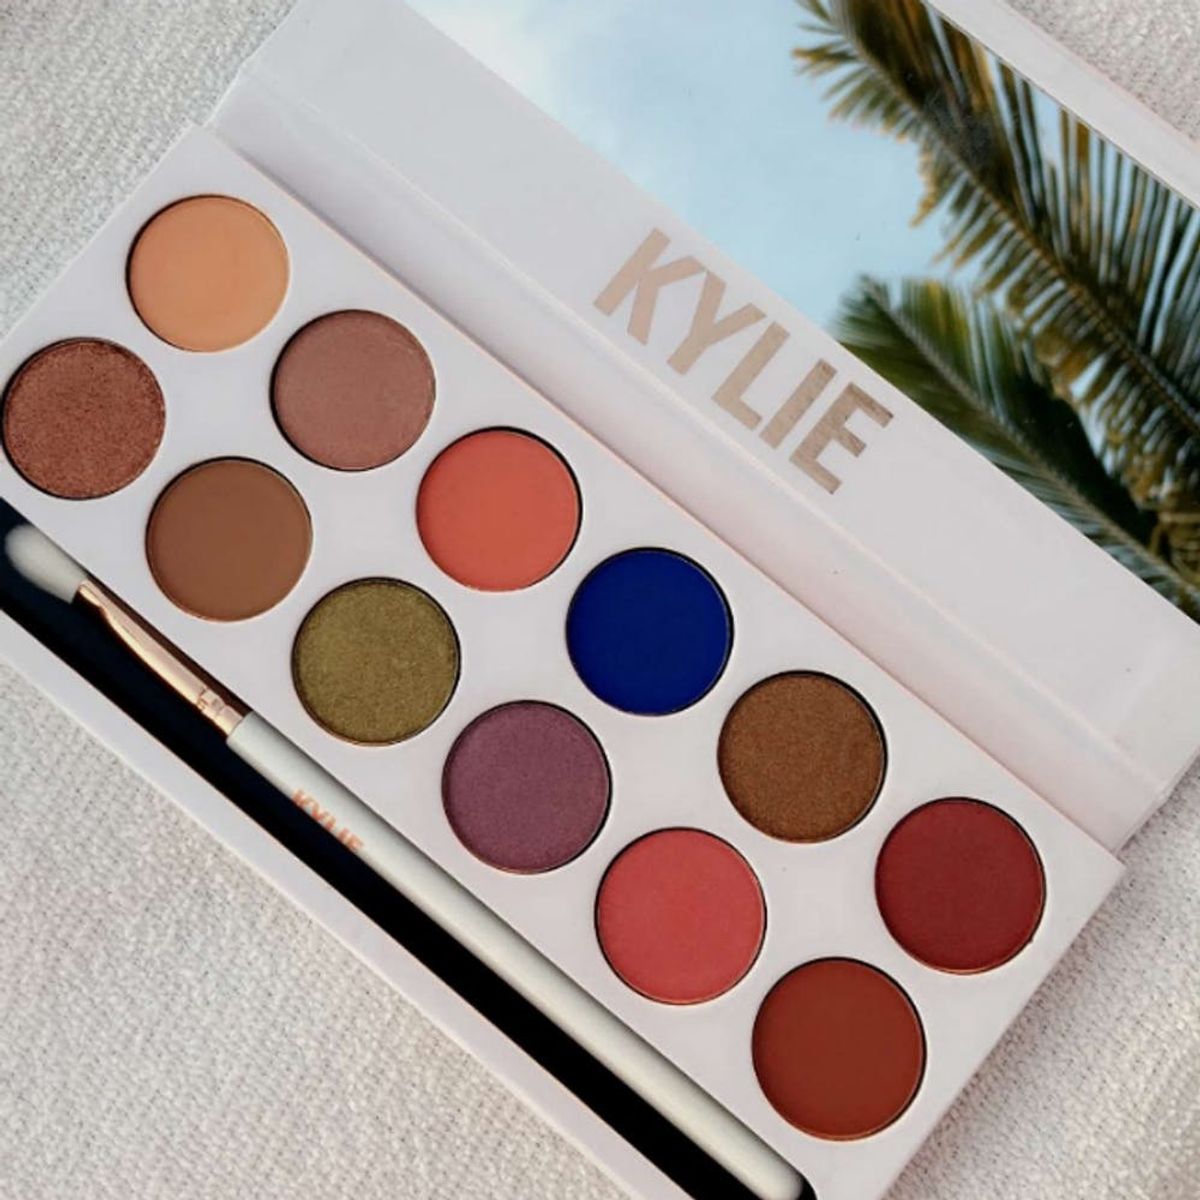 Kylie Jenner Is Teasing Her Newest Makeup Palette and It’s Confusing